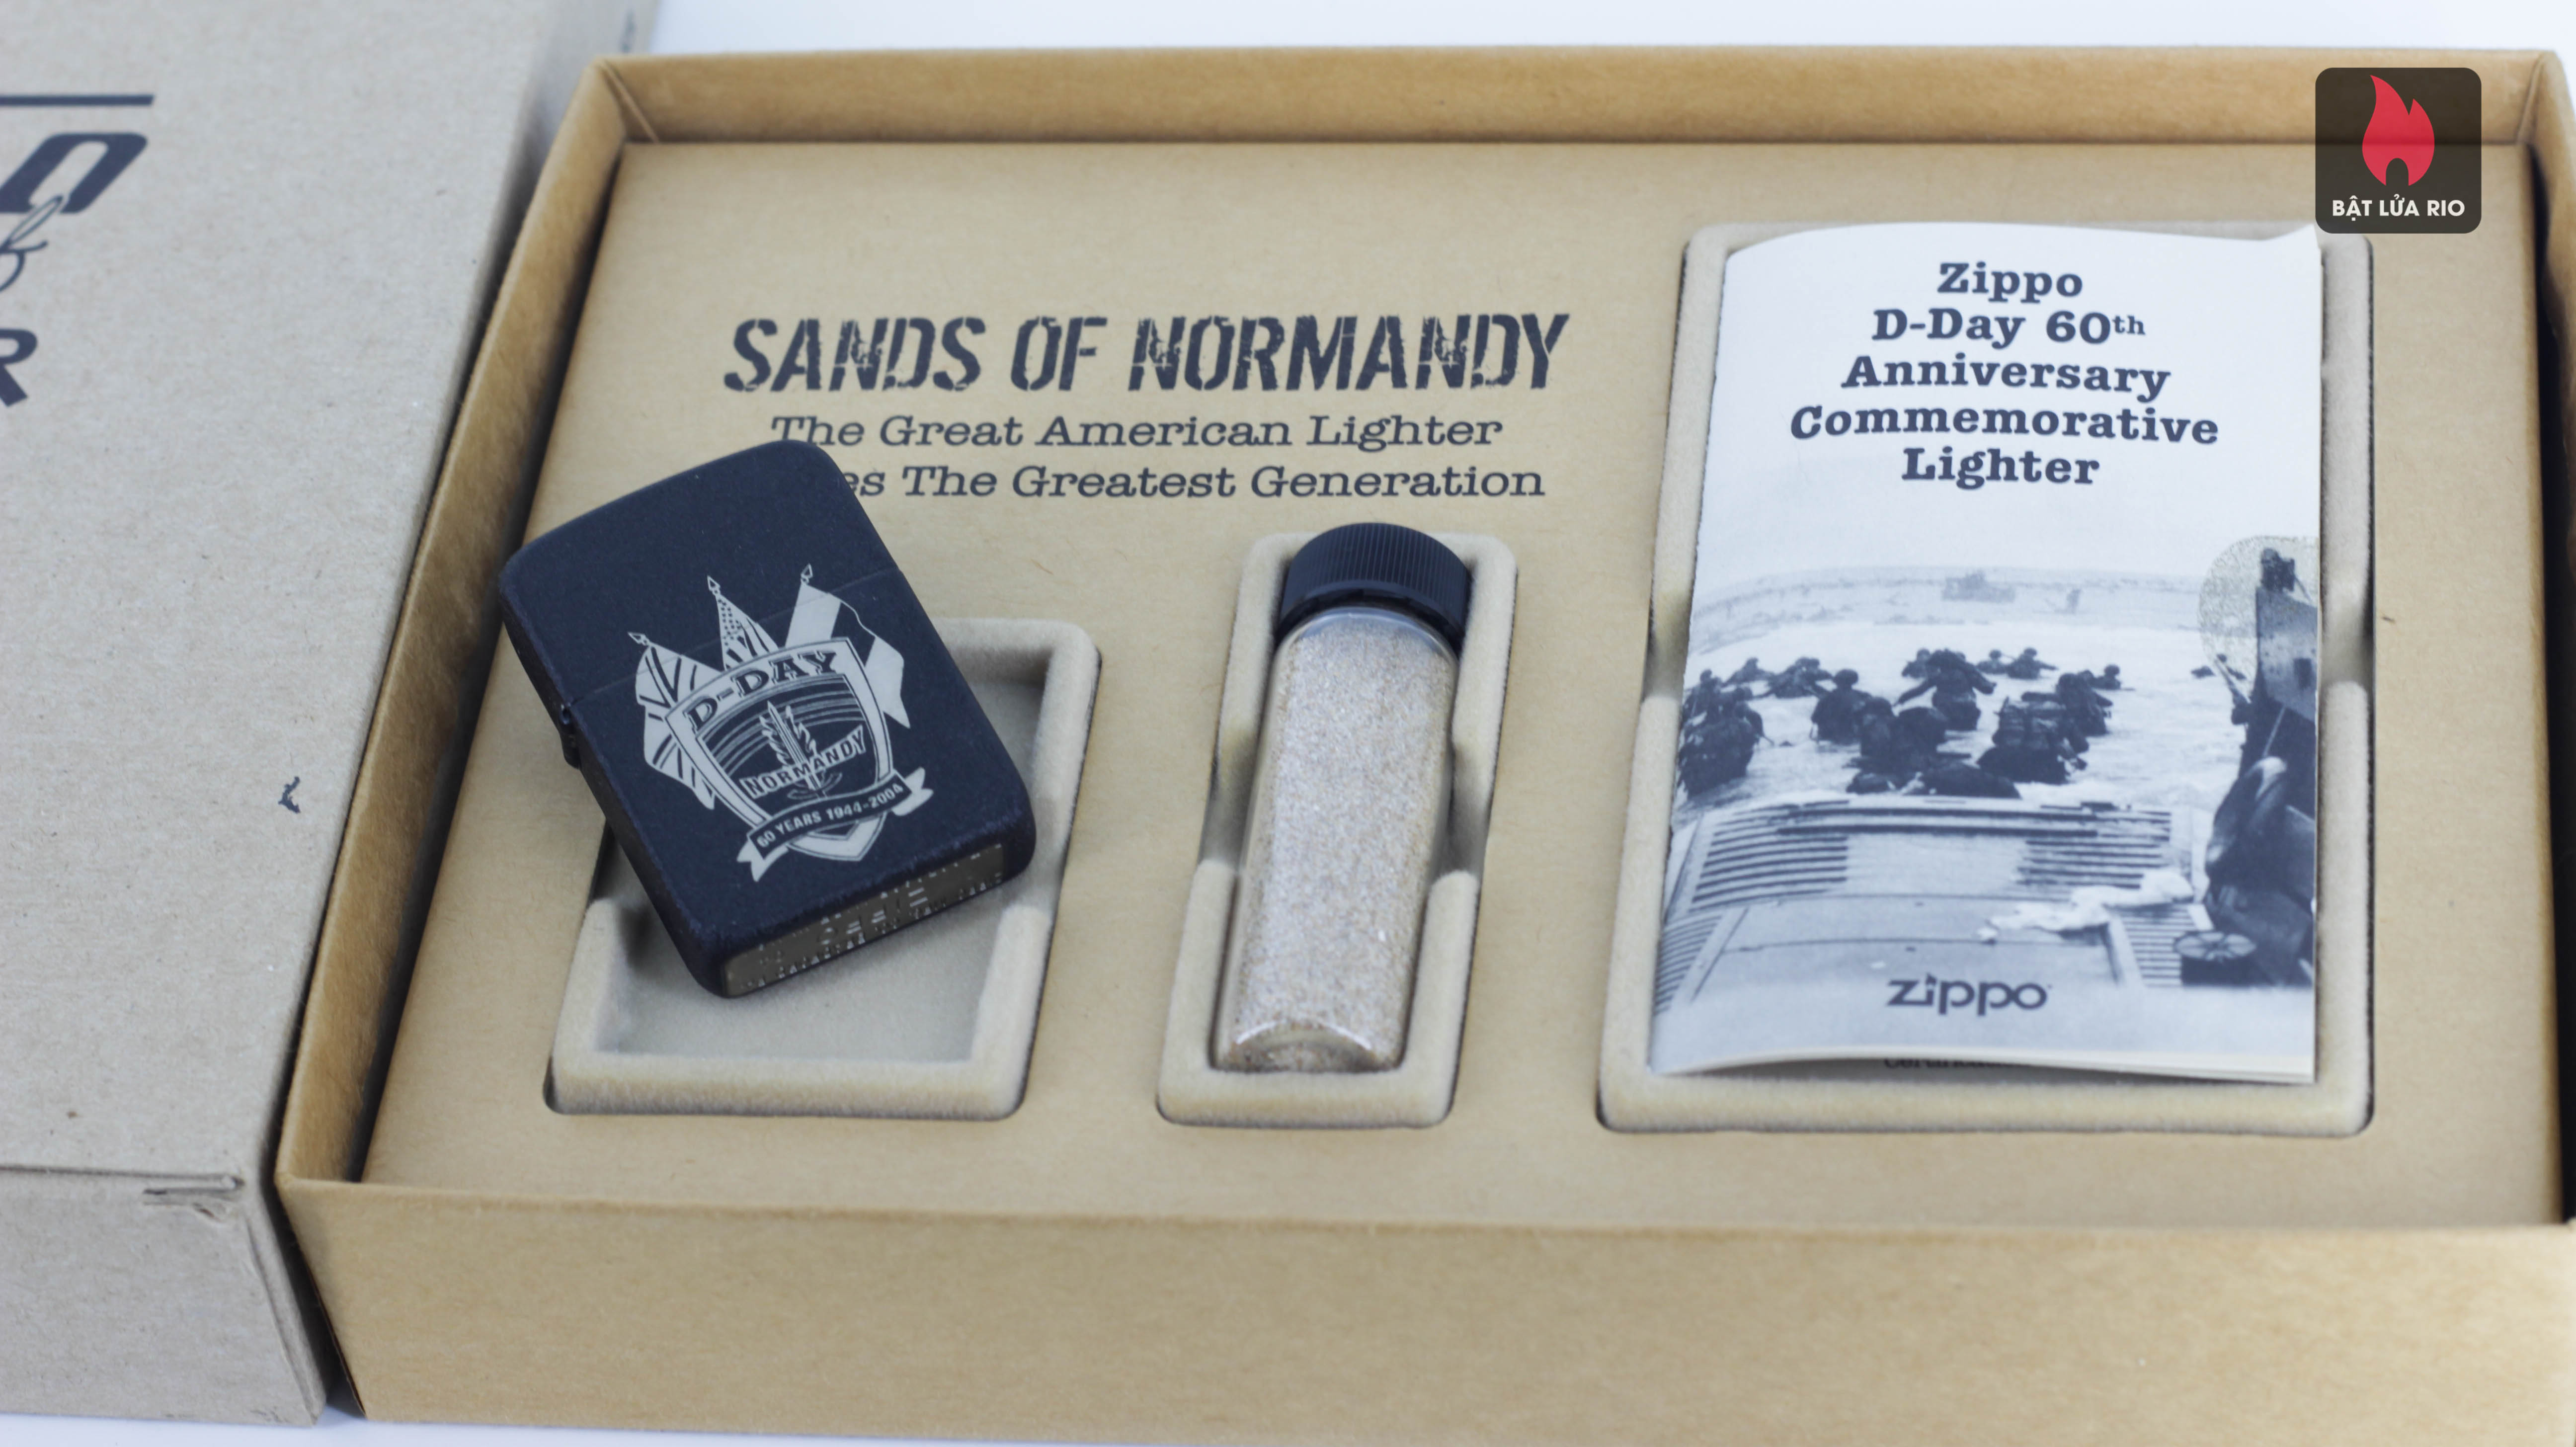 ZIPPO D-DAY 60TH ANNIVERSARY COMMEMORATIVE LIGHTER – SANDS OF NORMANDY